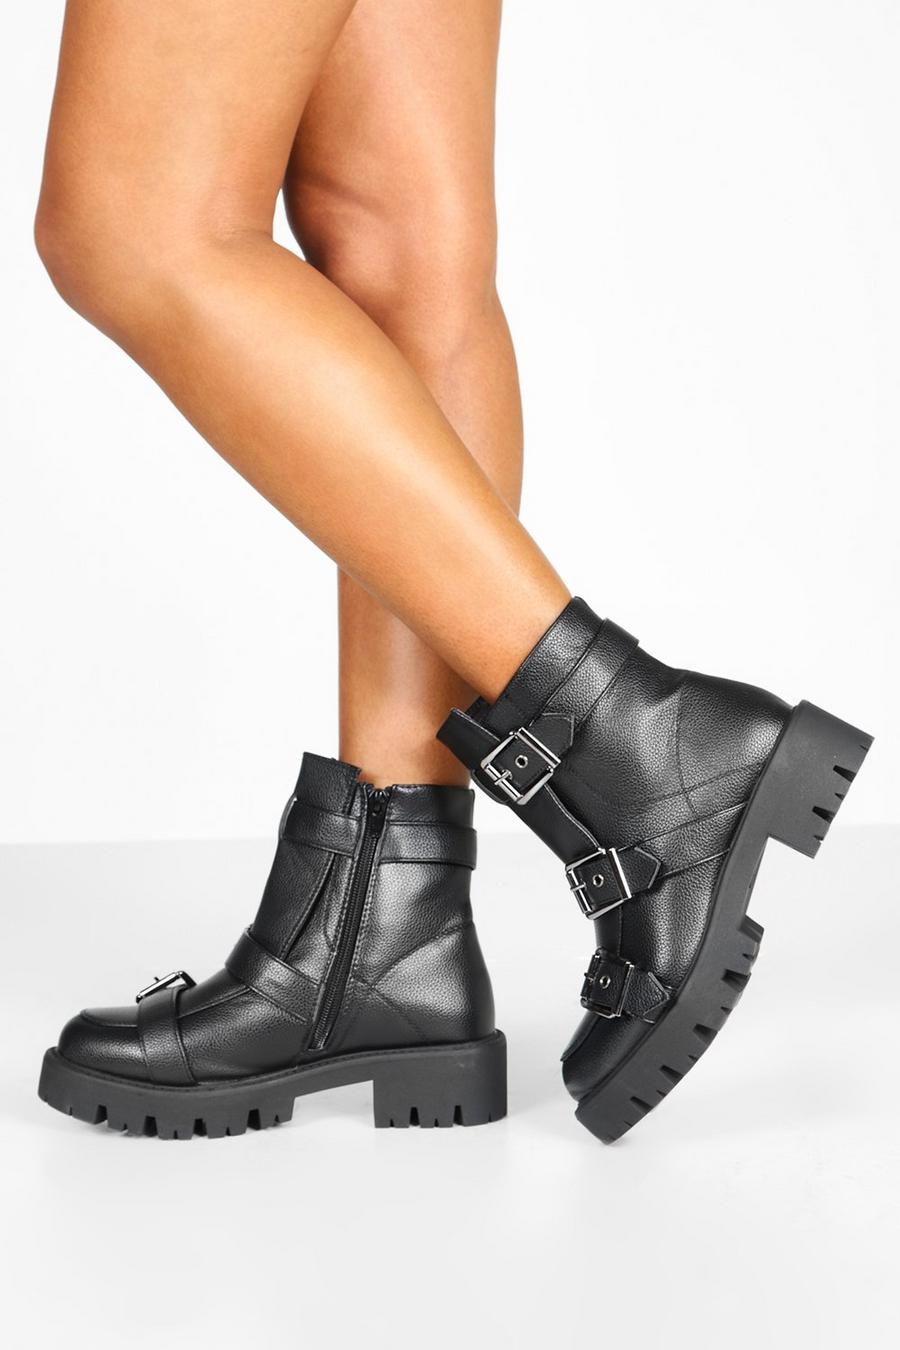 Black Buckle Trim Cleated Combat Boots image number 1